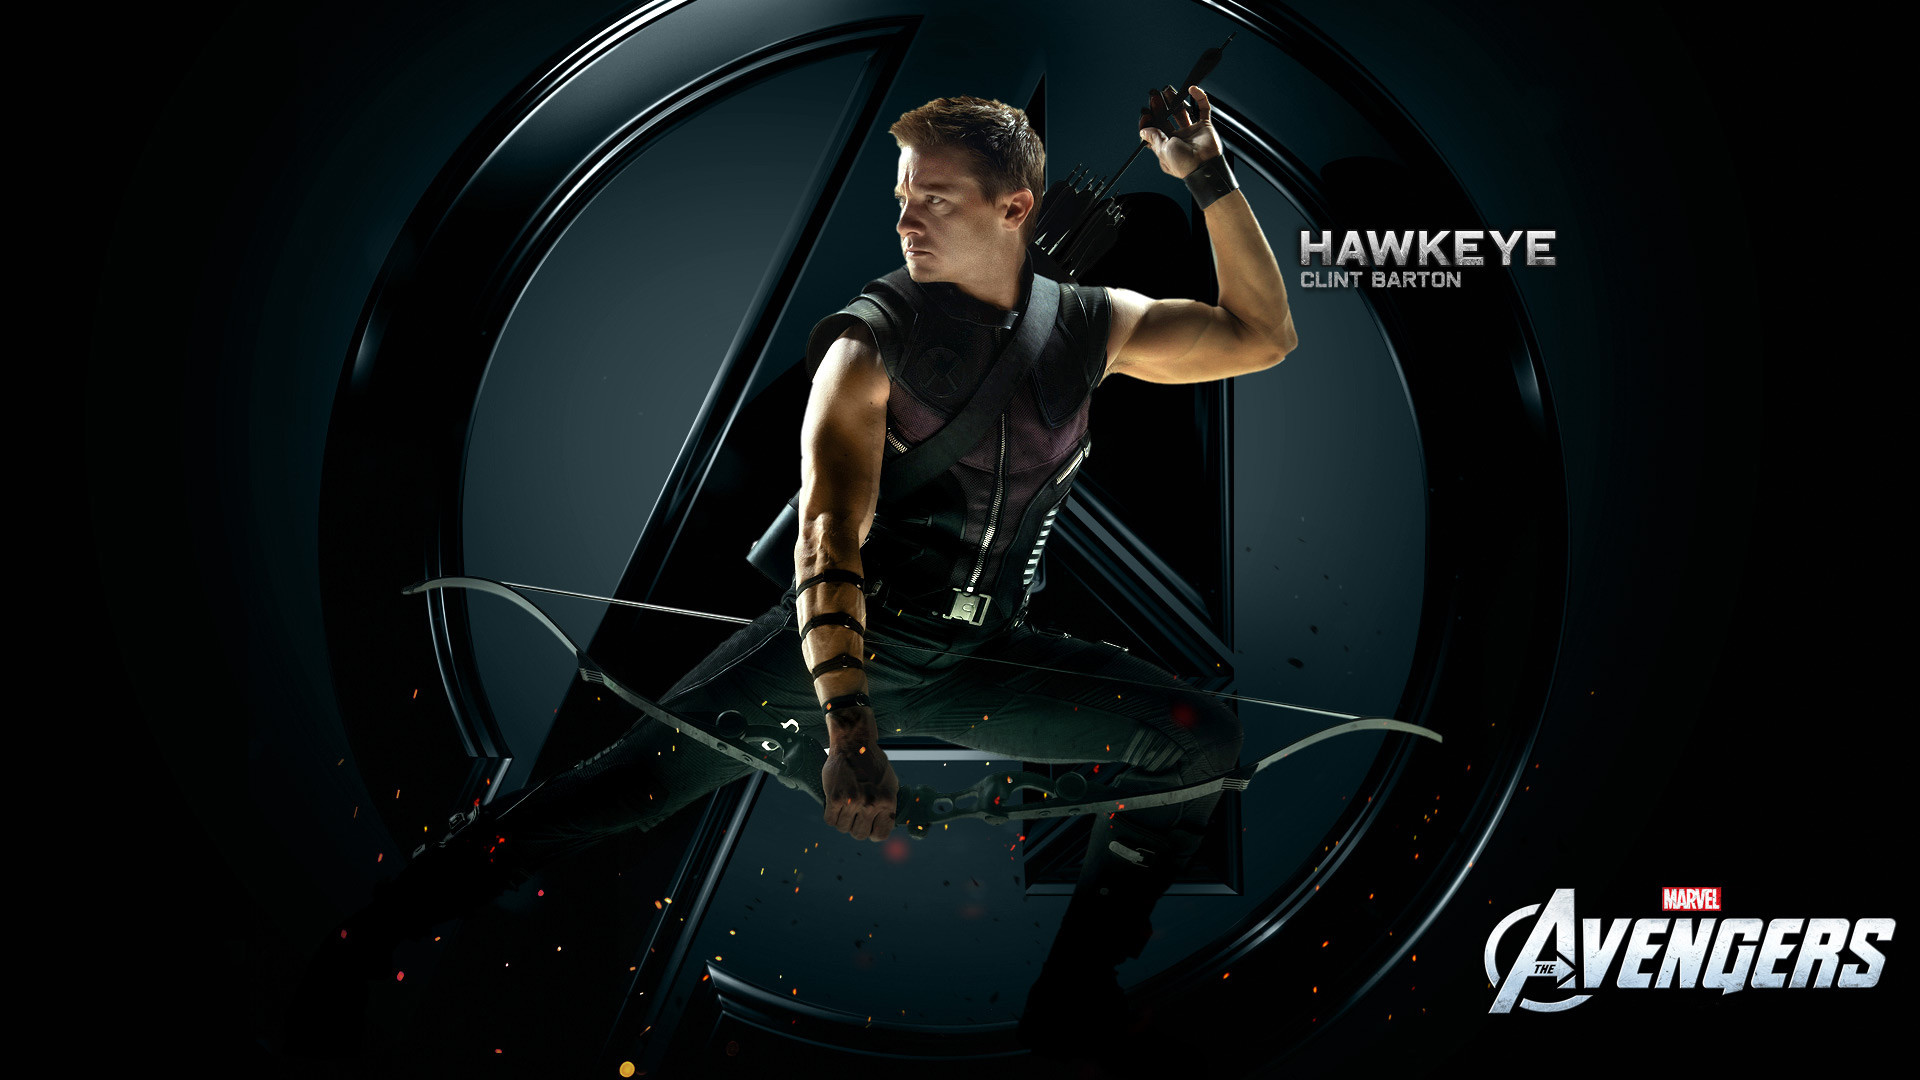 1920x1080 Hawkeye Hd Wallpaper Best Wallpapers PC Android iPhone and iPad 